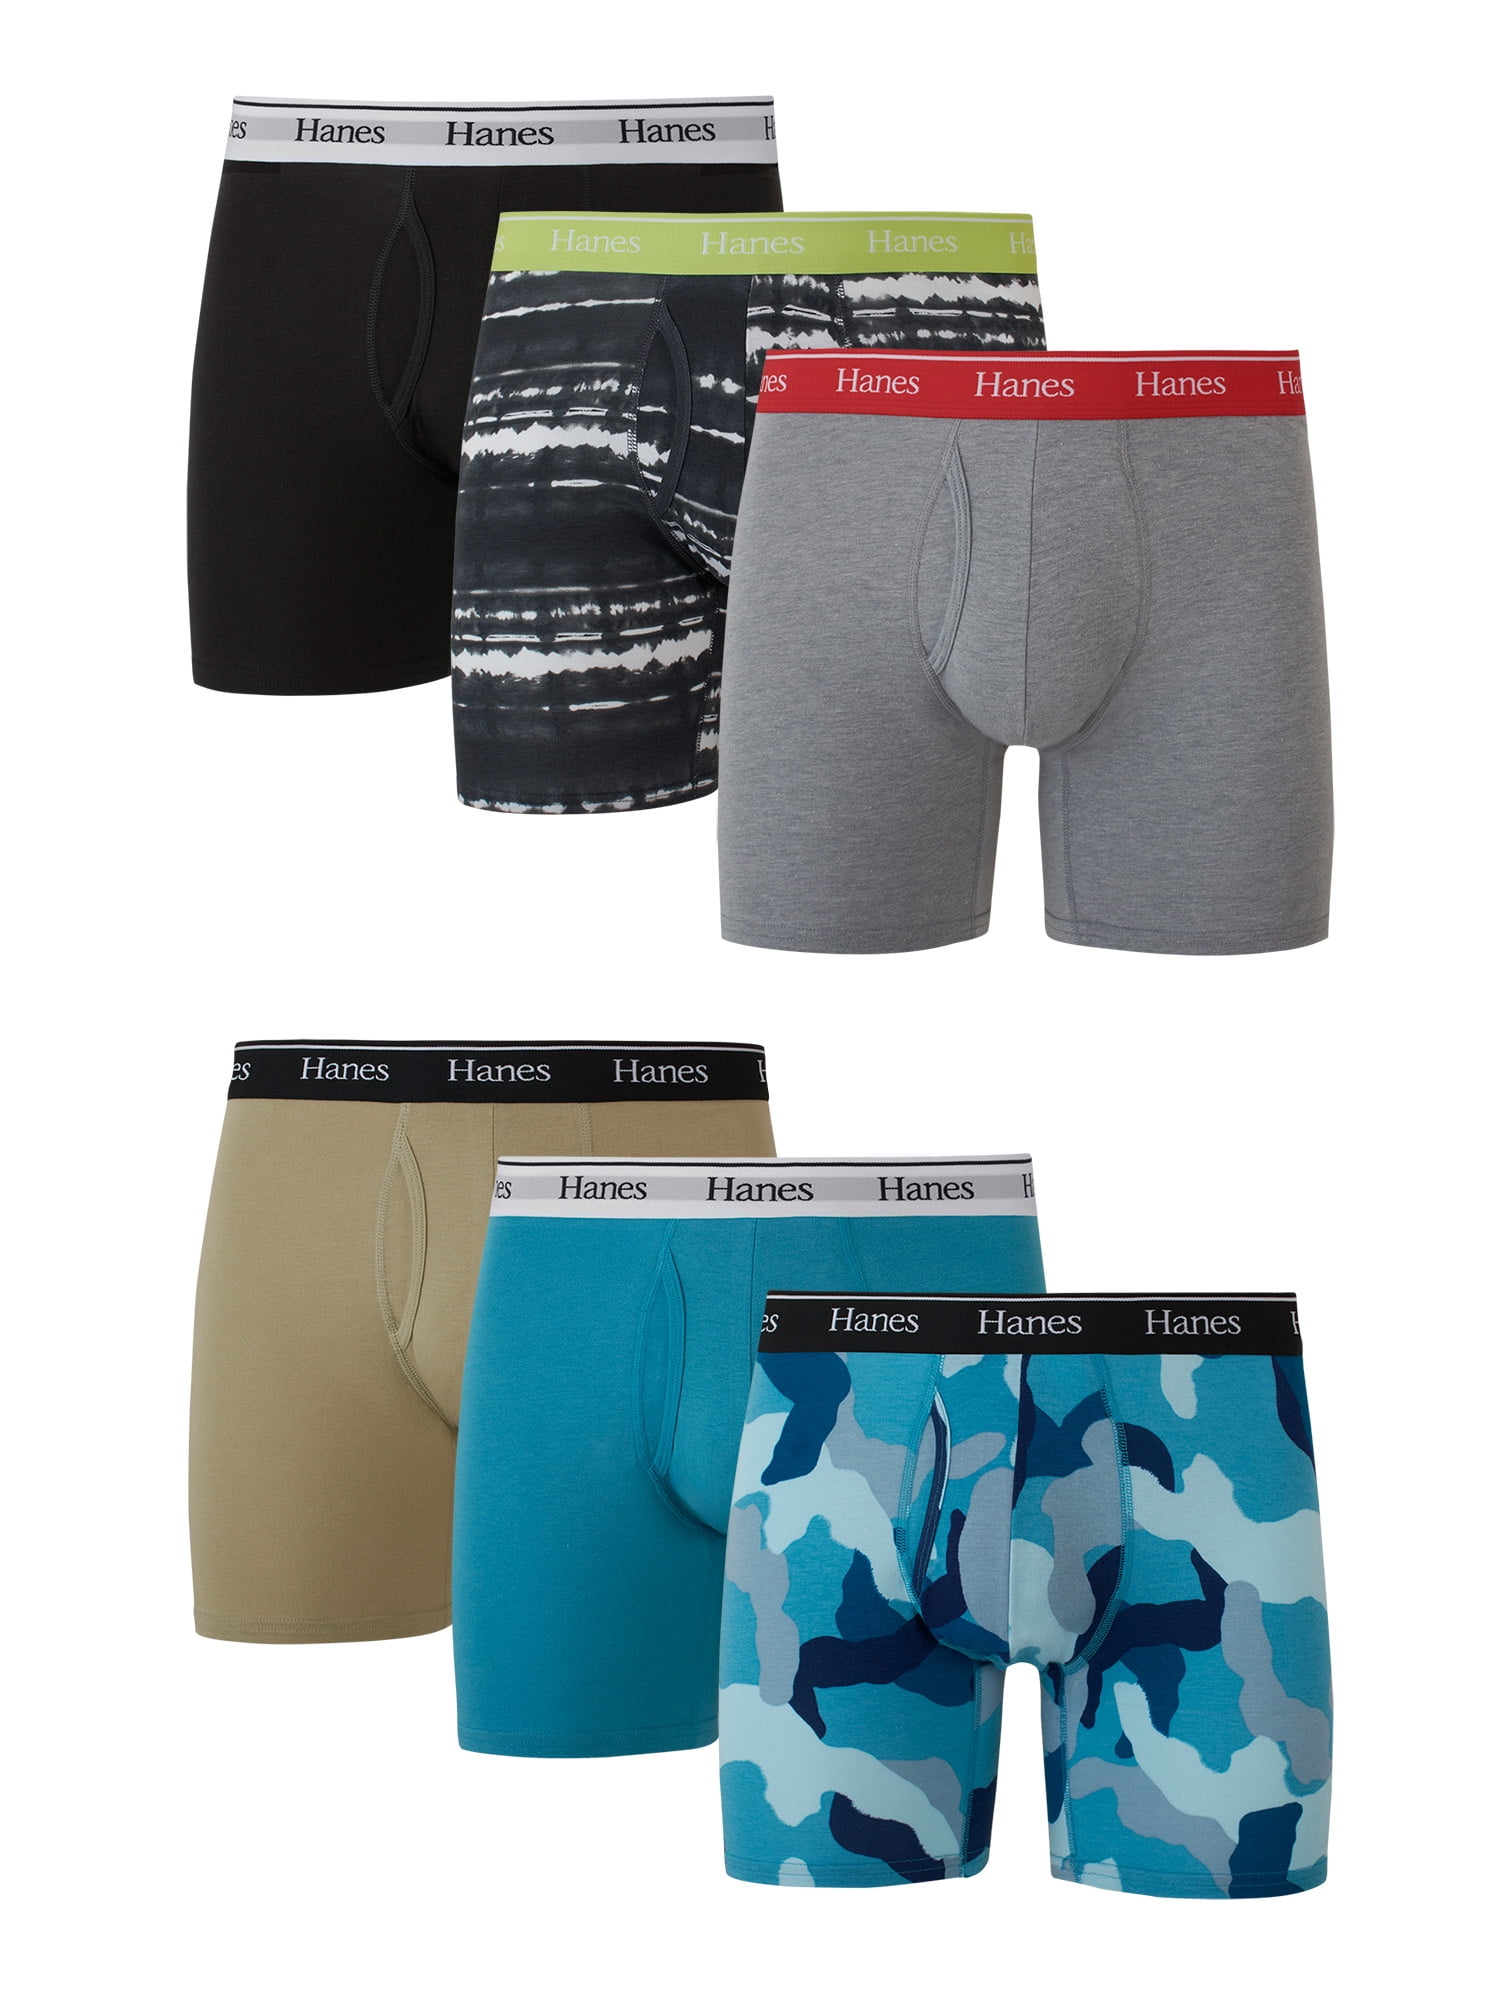 Why Cotton Boxer Shorts Are the Must-Have Item This Summer